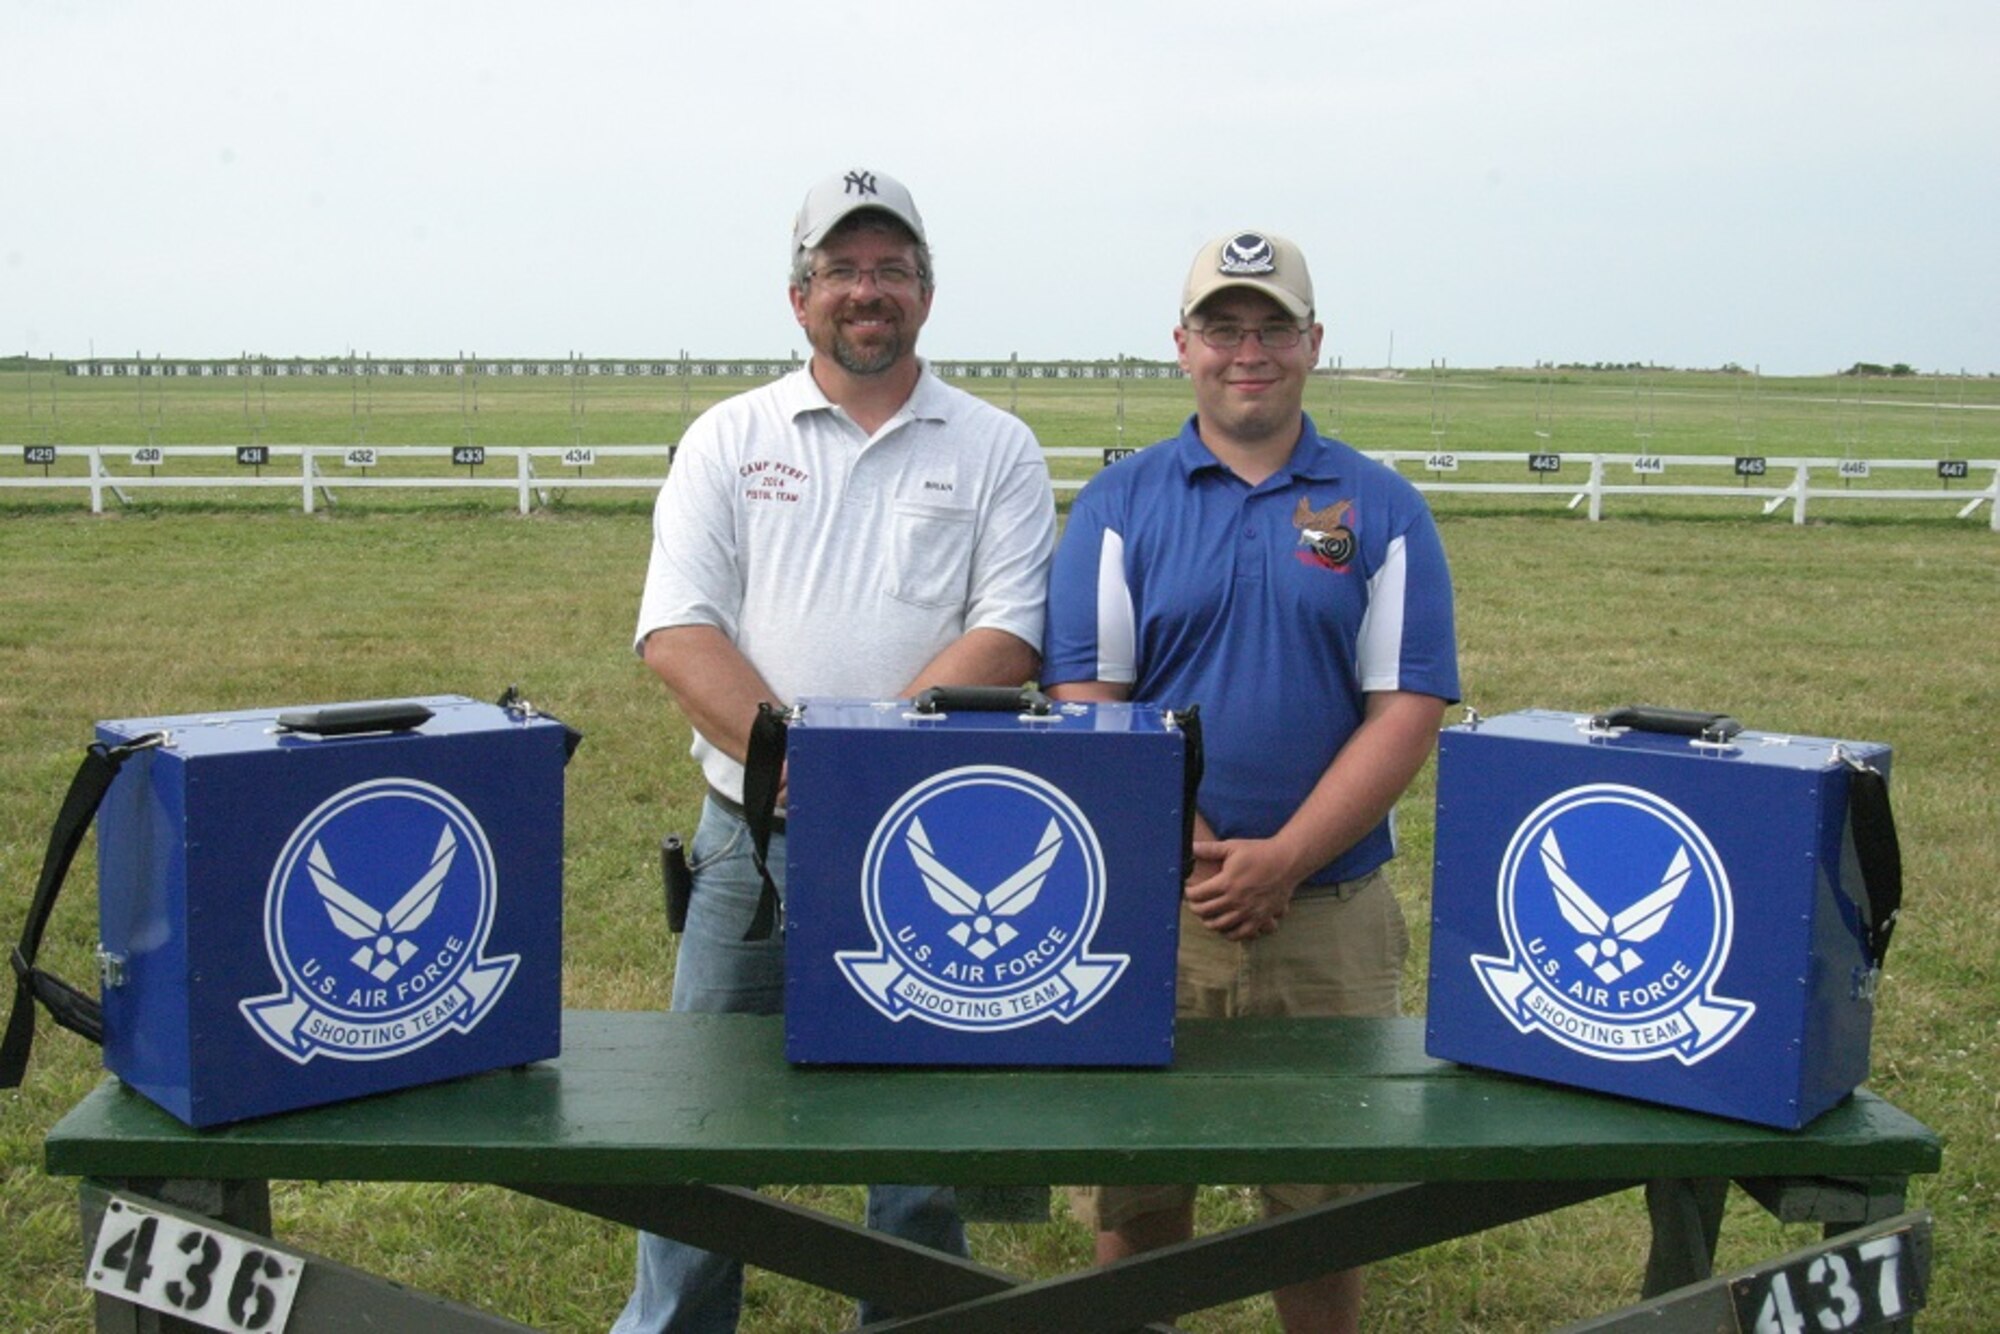 Brain Mallette and his son, U.S. Air Force Staff Sgt. Richard Mallette, 55th Maintenance Squadron aerospace ground equipment craftsman, pose for a photo at Camp Perry, Ohio after National Matches. His son is a member of the Air Force National Pistol Team. (Courtesy photo) 